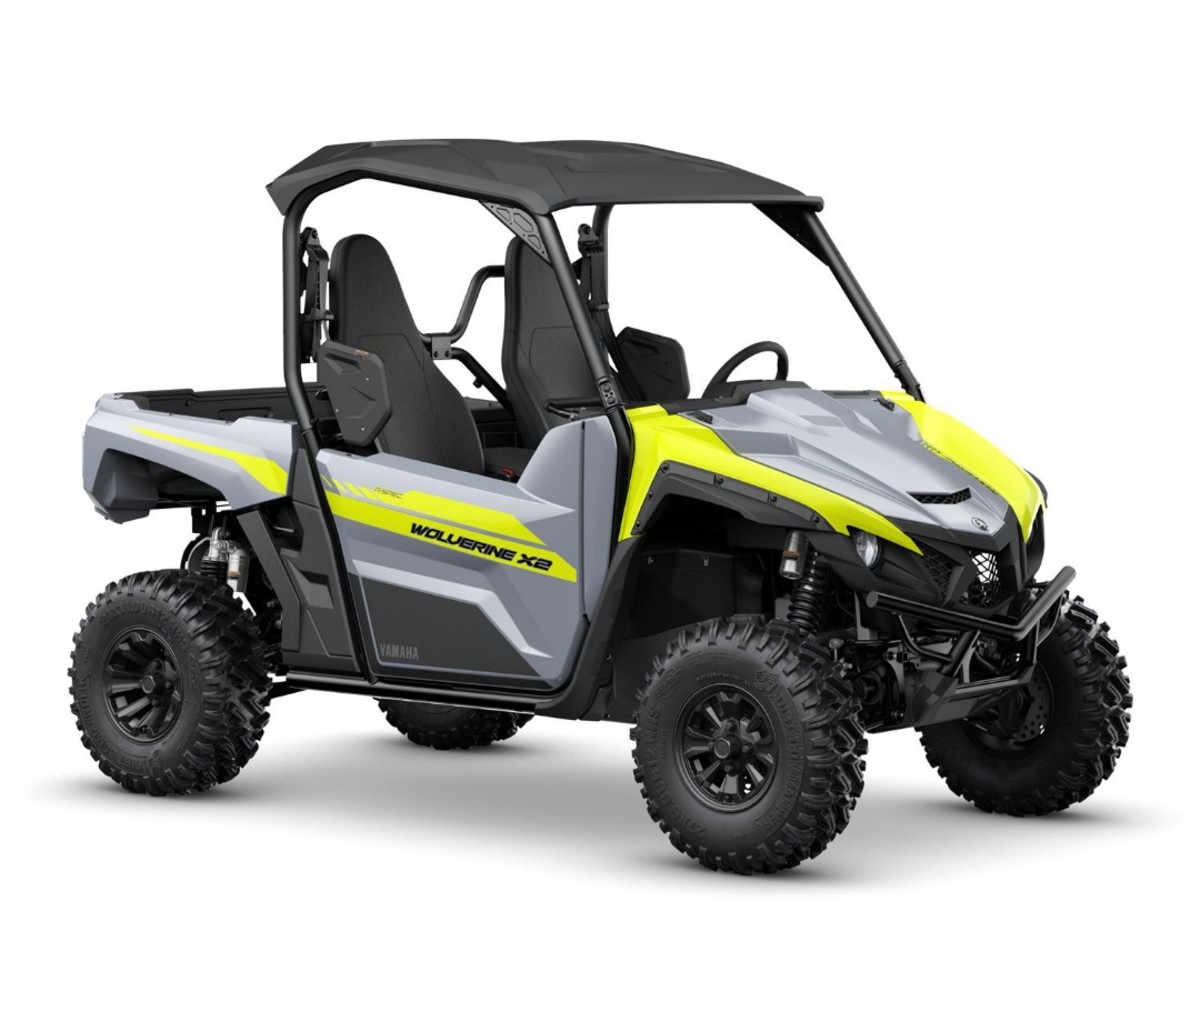 Yamaha Wolverine X2 850 R-Spec in grey and yellow on a white background. side-by-side UTVs